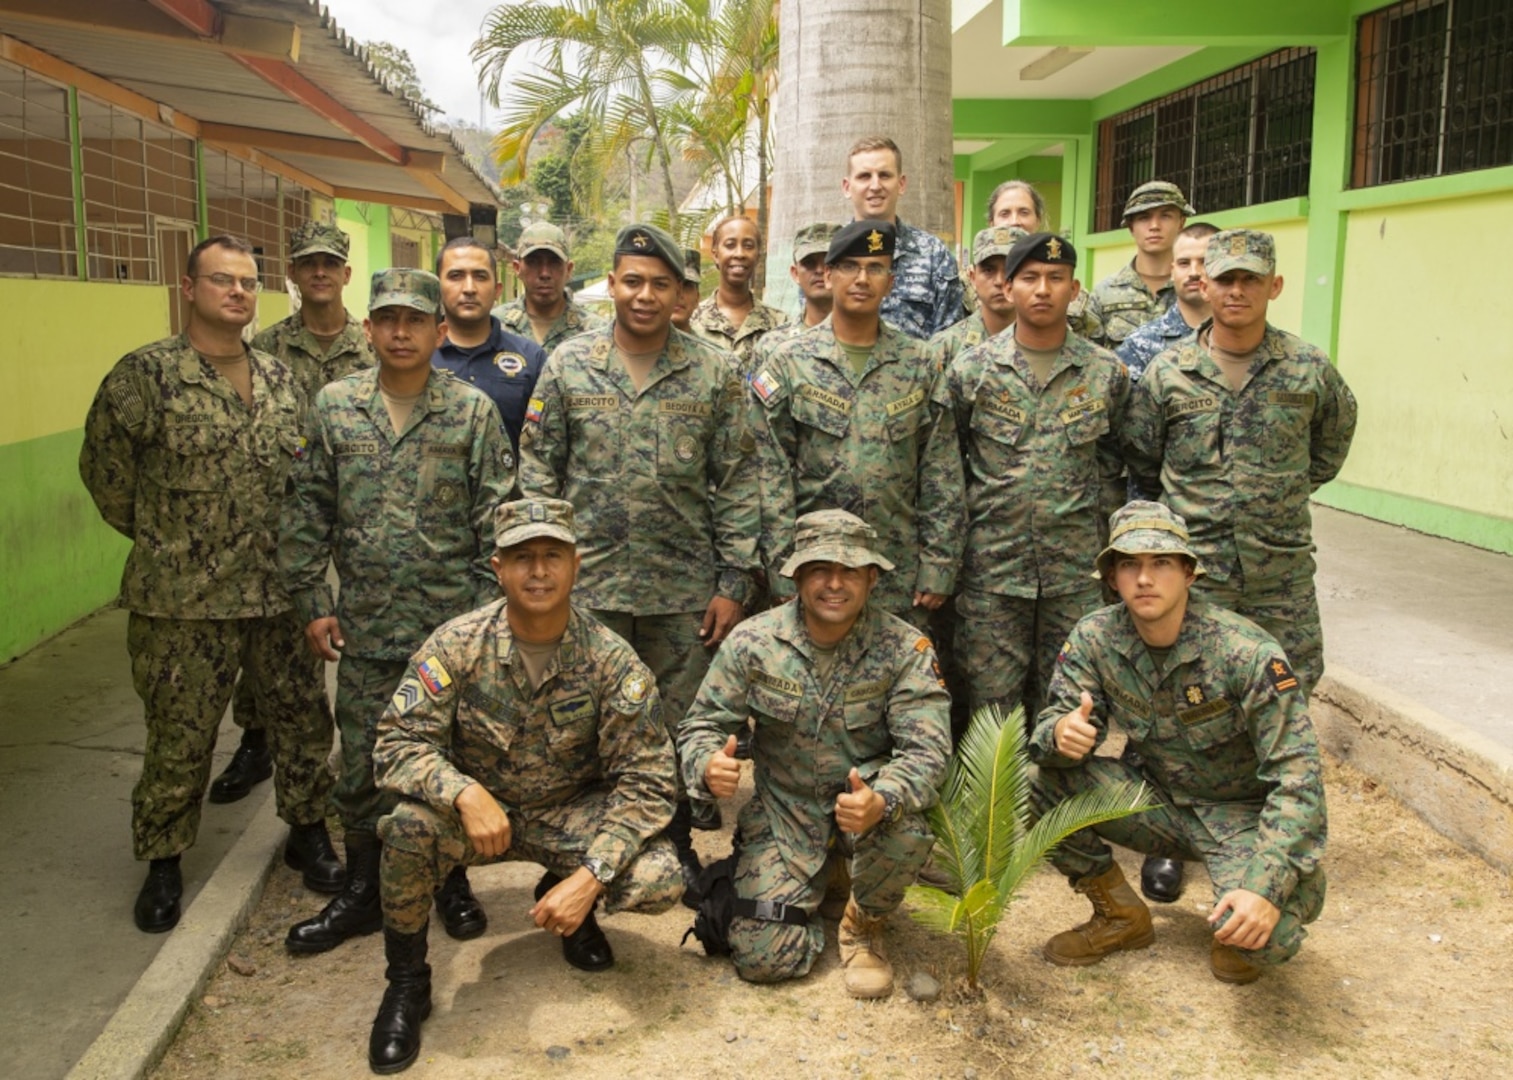 Canadian Forces Master Corporal Kristian Tam, discusses field medicine techniques during a multi-nation information exchange meeting on medicine in a tactical environment with American and Ecuadorian service members.